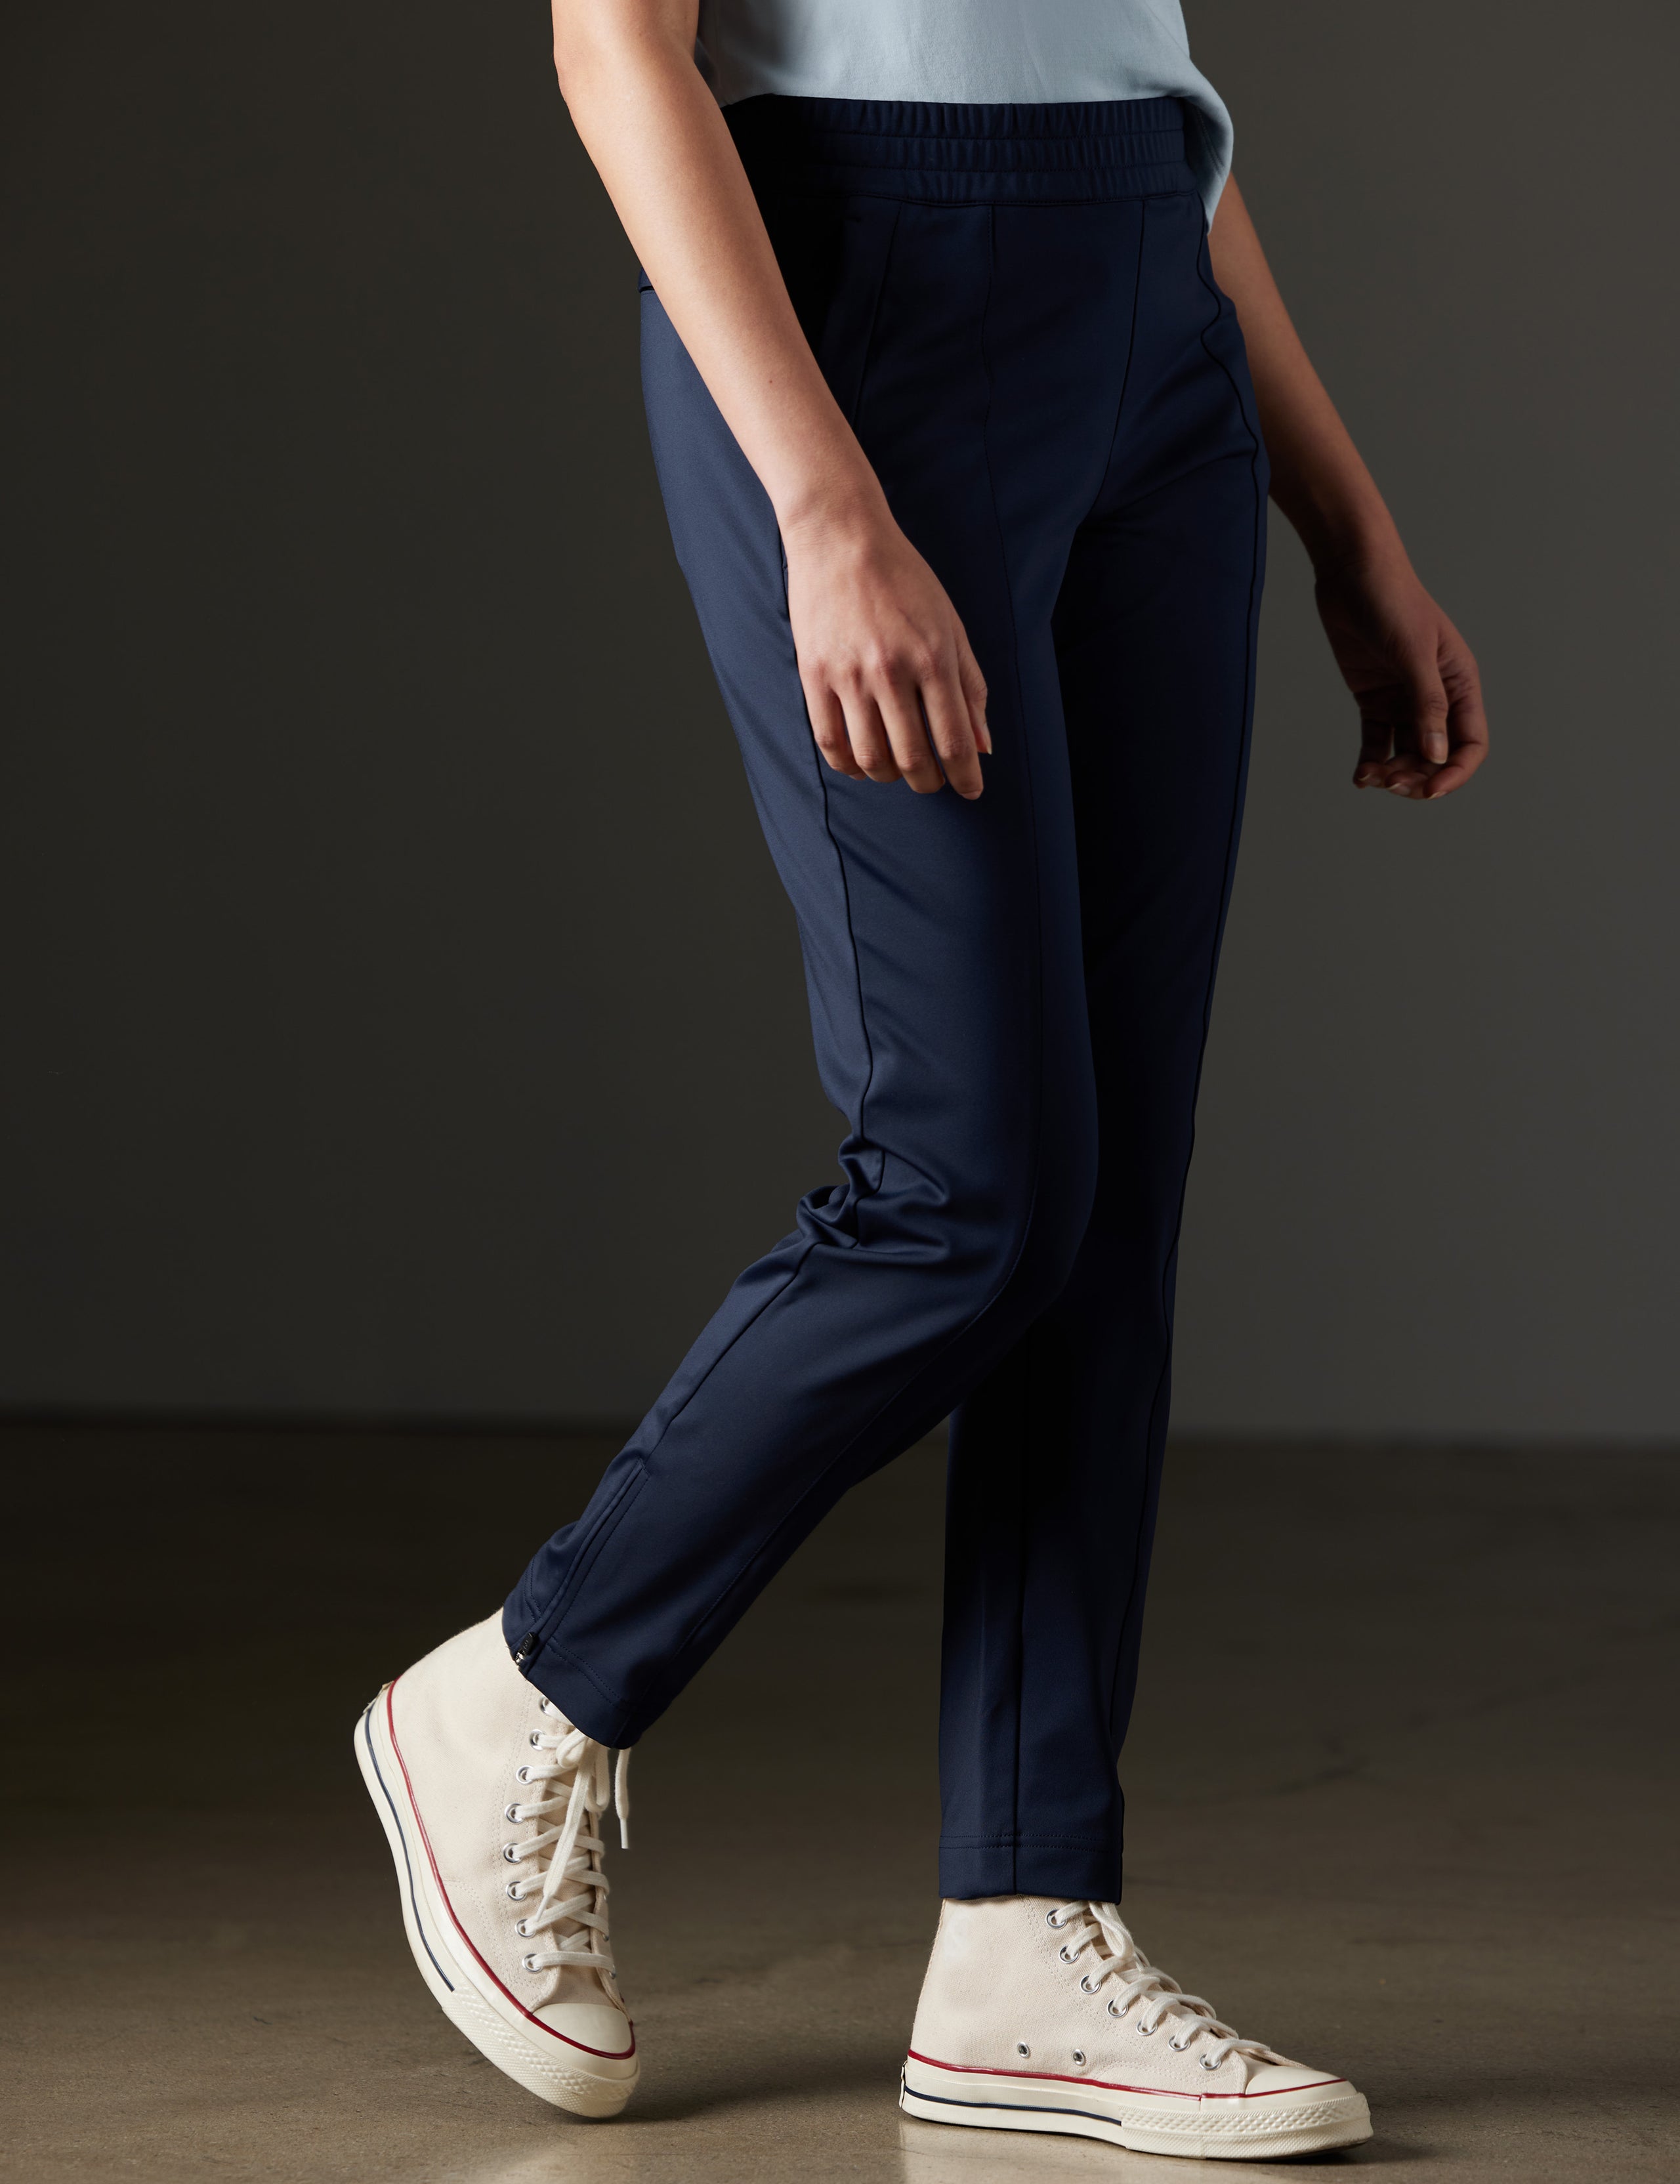 Woman wearing blue pants from AETHER Apparel